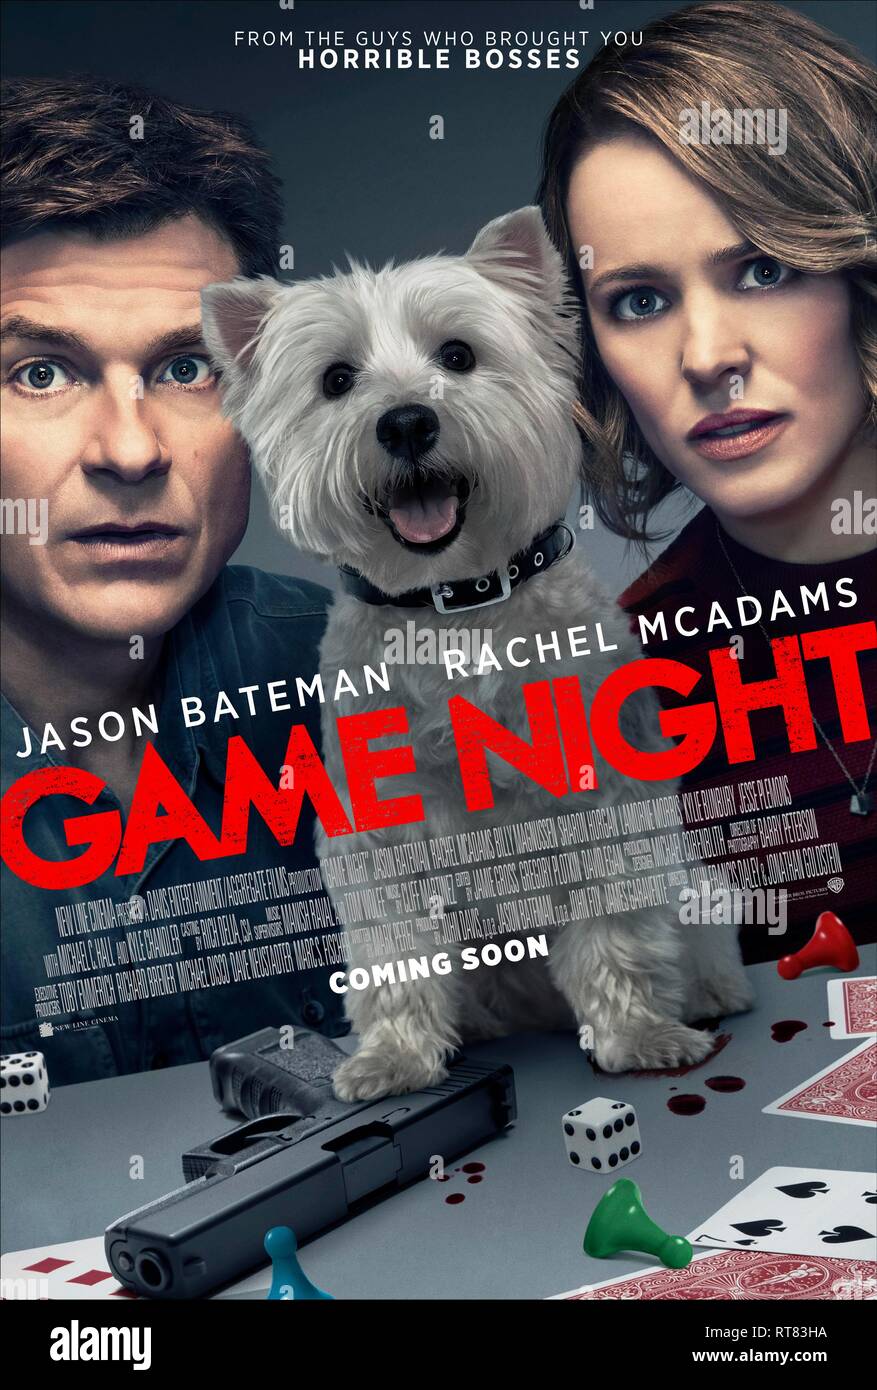 RELEASE DATE: February 23, 2018 TITLE: Game Night STUDIO: New Line Cinema DIRECTOR: John Francis Daley, Jonathan Goldstein PLOT: A group of friends who meet regularly for game nights find themselves entangled in a real-life mystery when the shady brother of one of them is seemingly kidnapped by dangerous gangsters. STARRING: Jason Bateman, Rachel McAdams, Kyle Chandler. (Credit Image: © New Line Cinema/Entertainment Pictures) Stock Photo